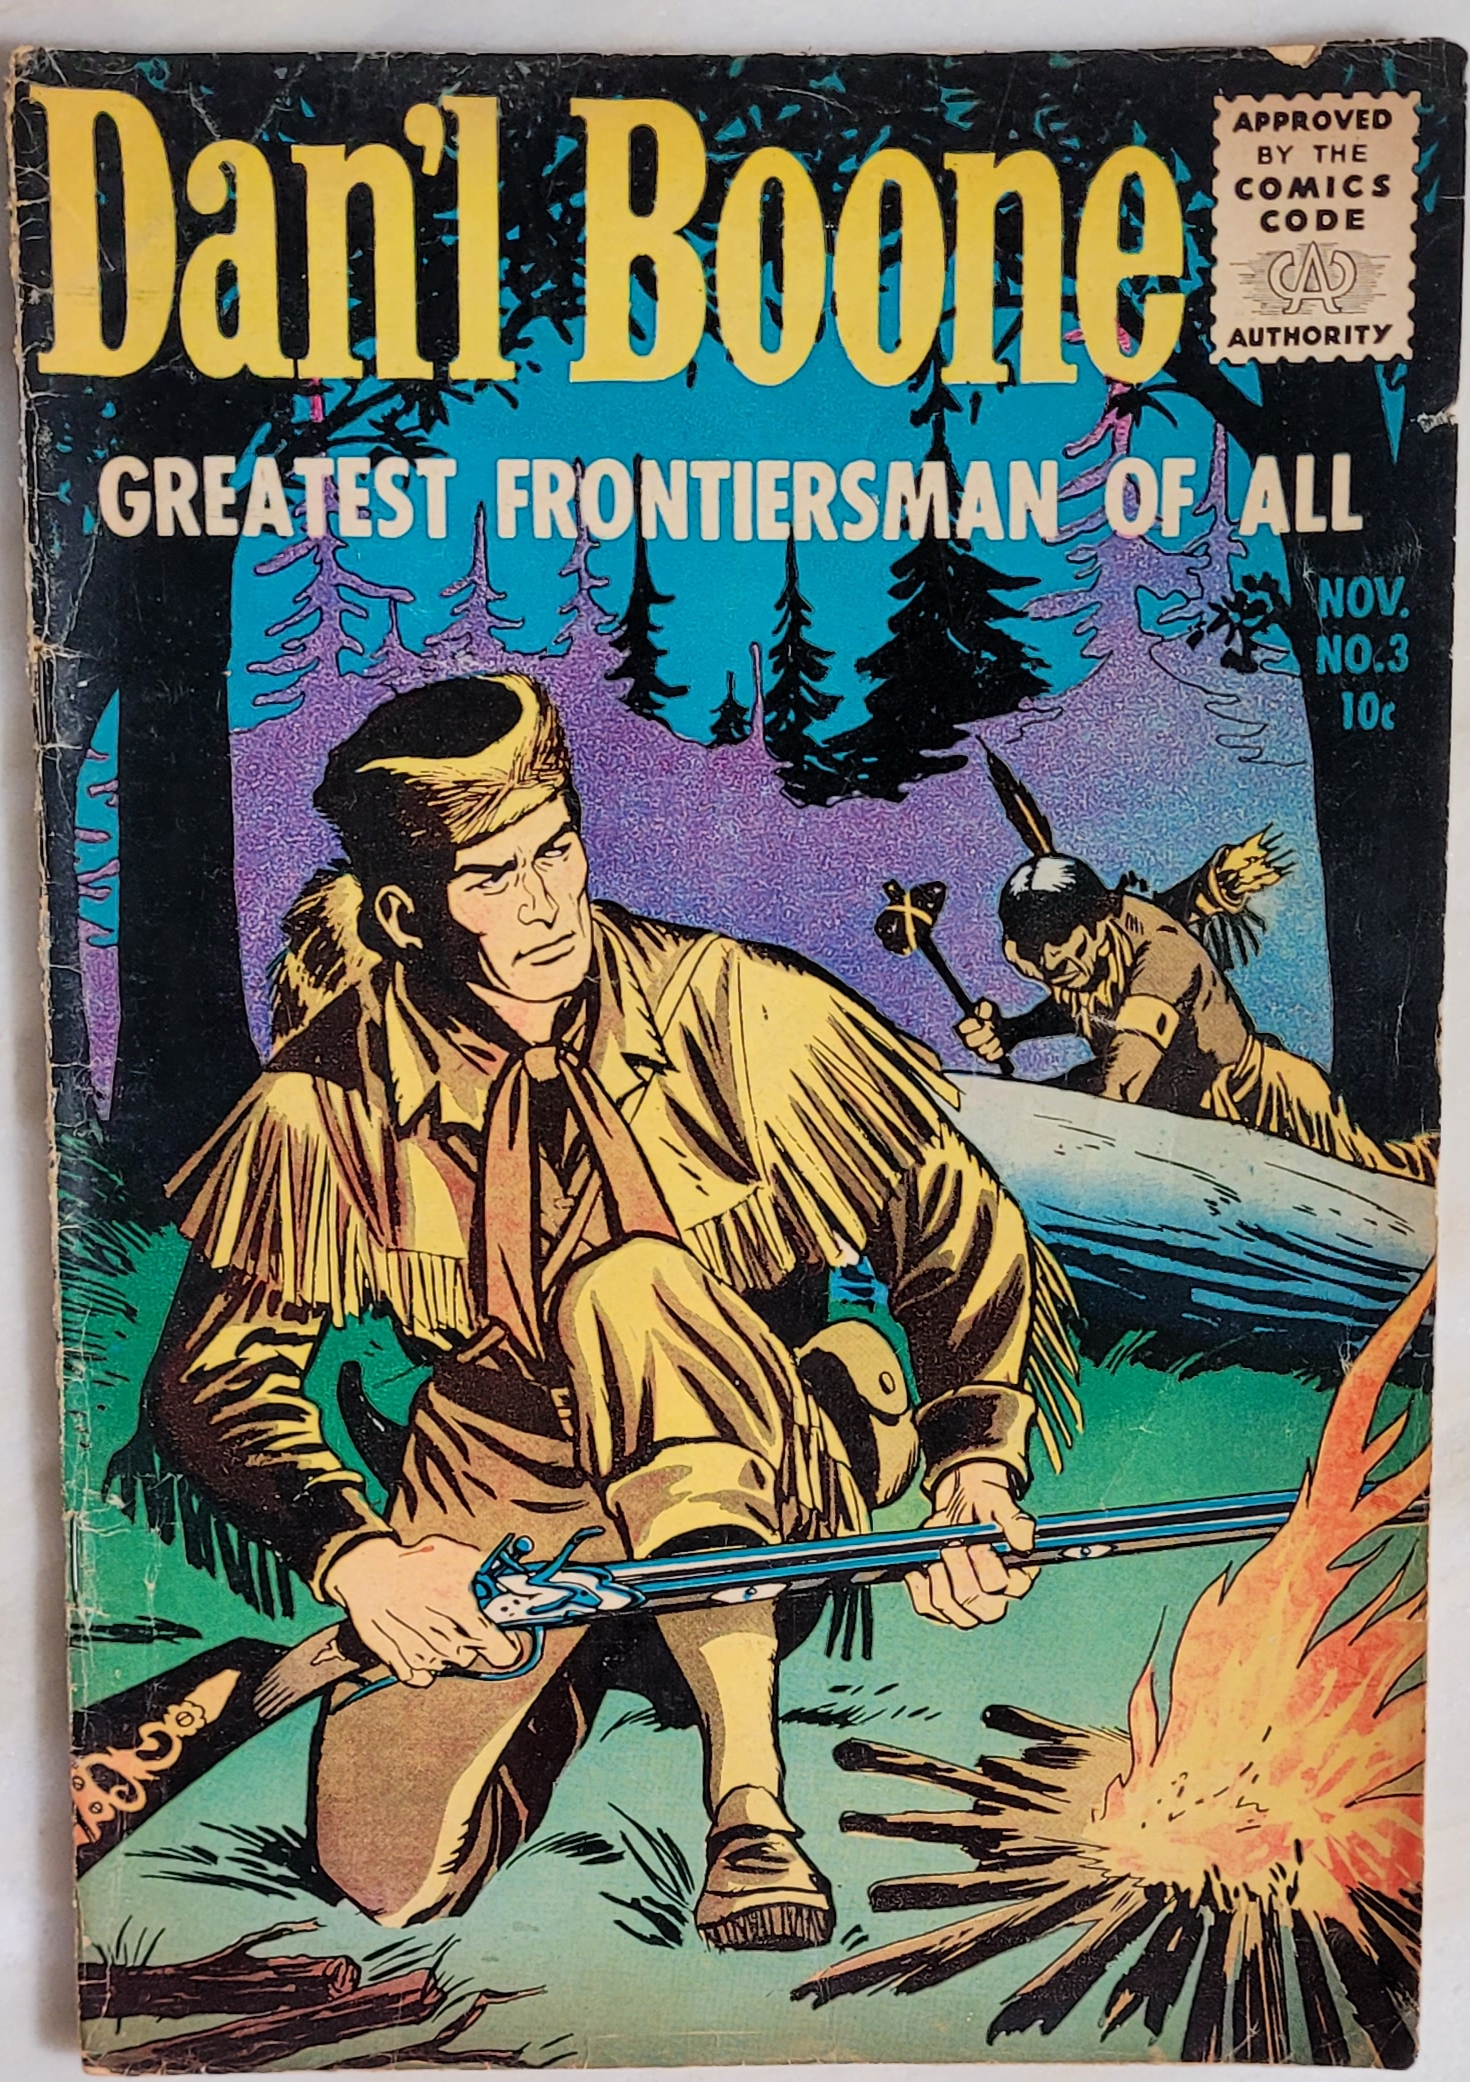 Dan'l Boone: Greatest Frontiersman of All #3 - Front Cover